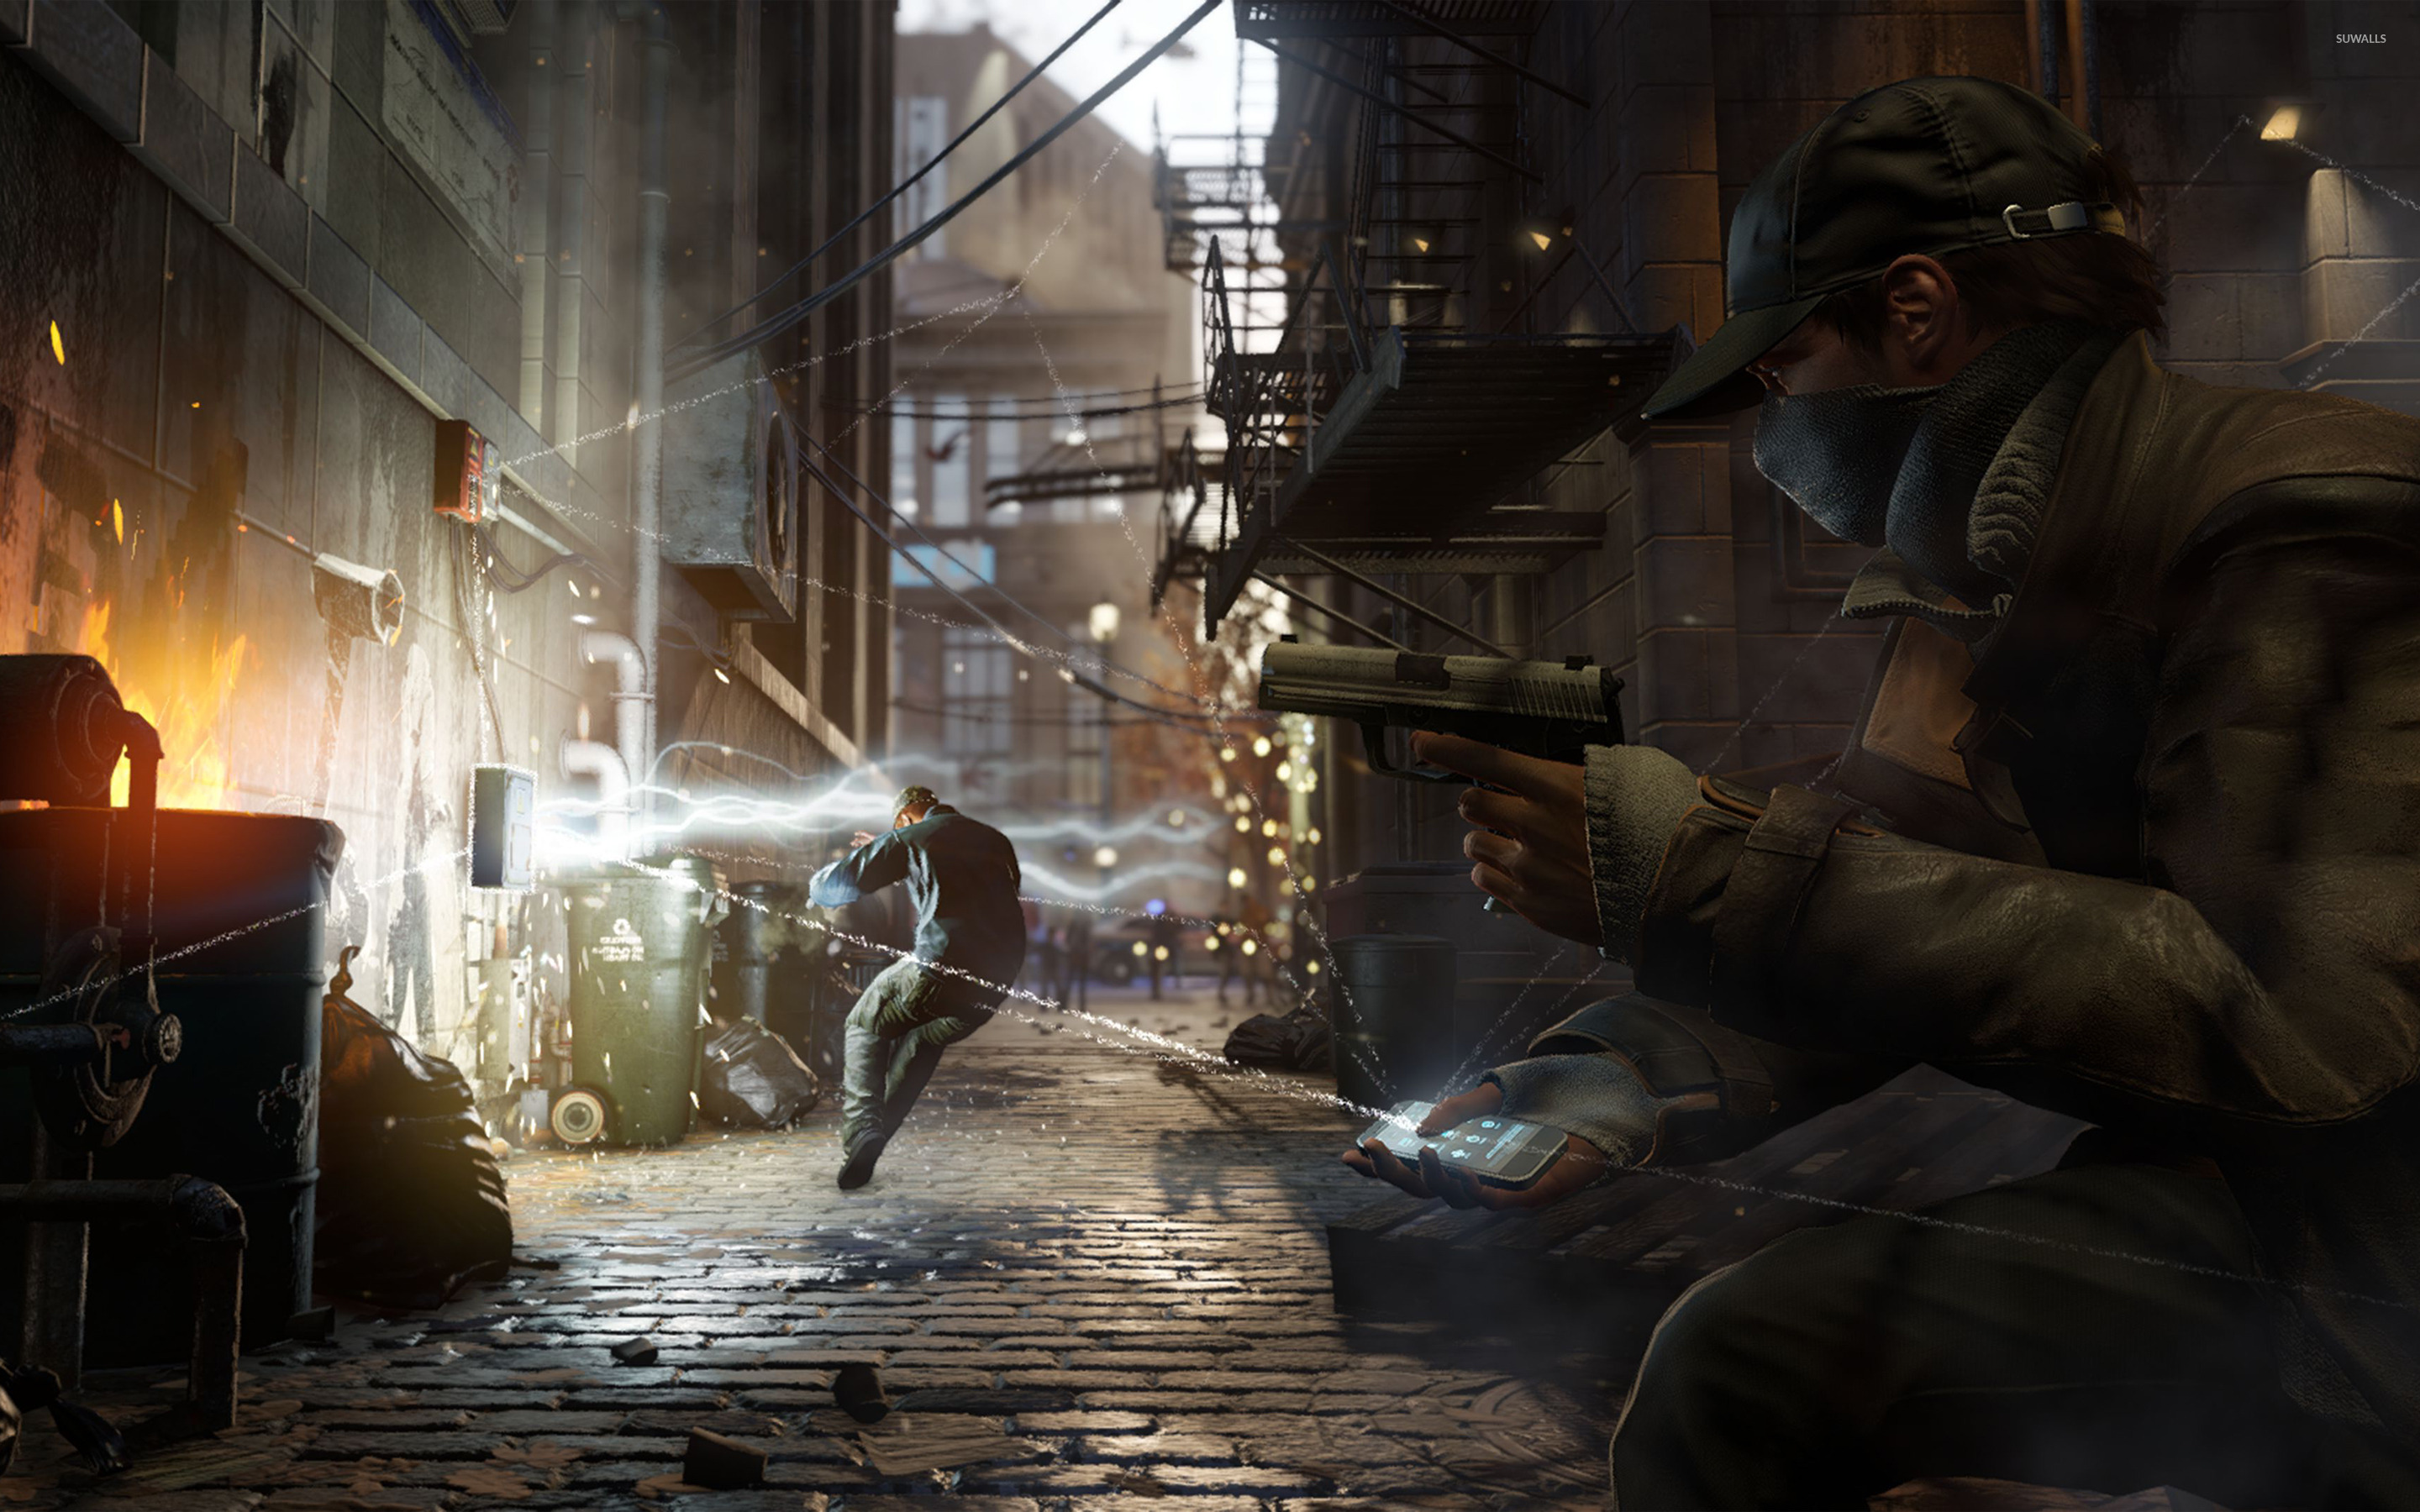 download watch dogs full game free